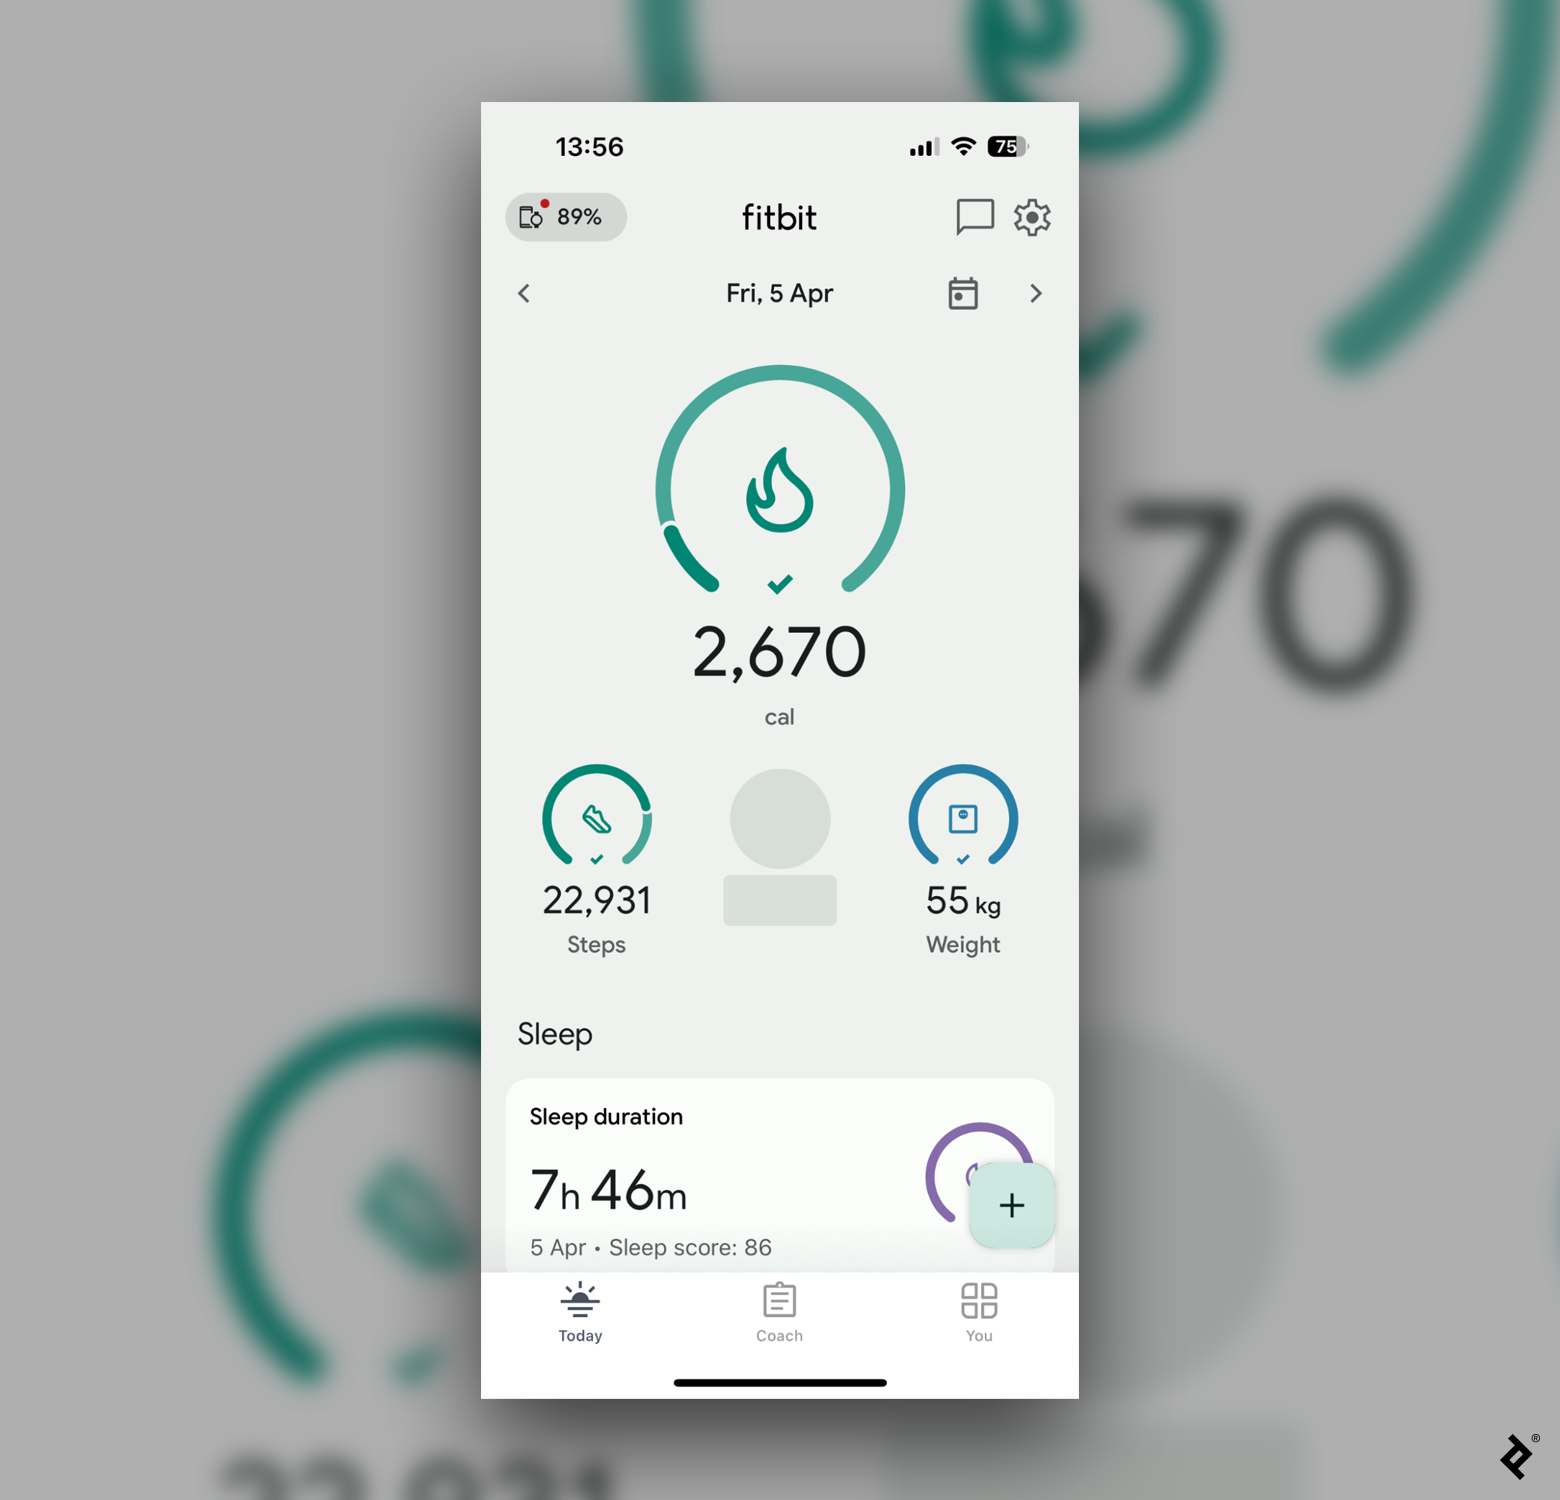 The Fitbit mobile app dashboard shows an overview of a user’s daily activities, including the number of steps taken and calories burned.